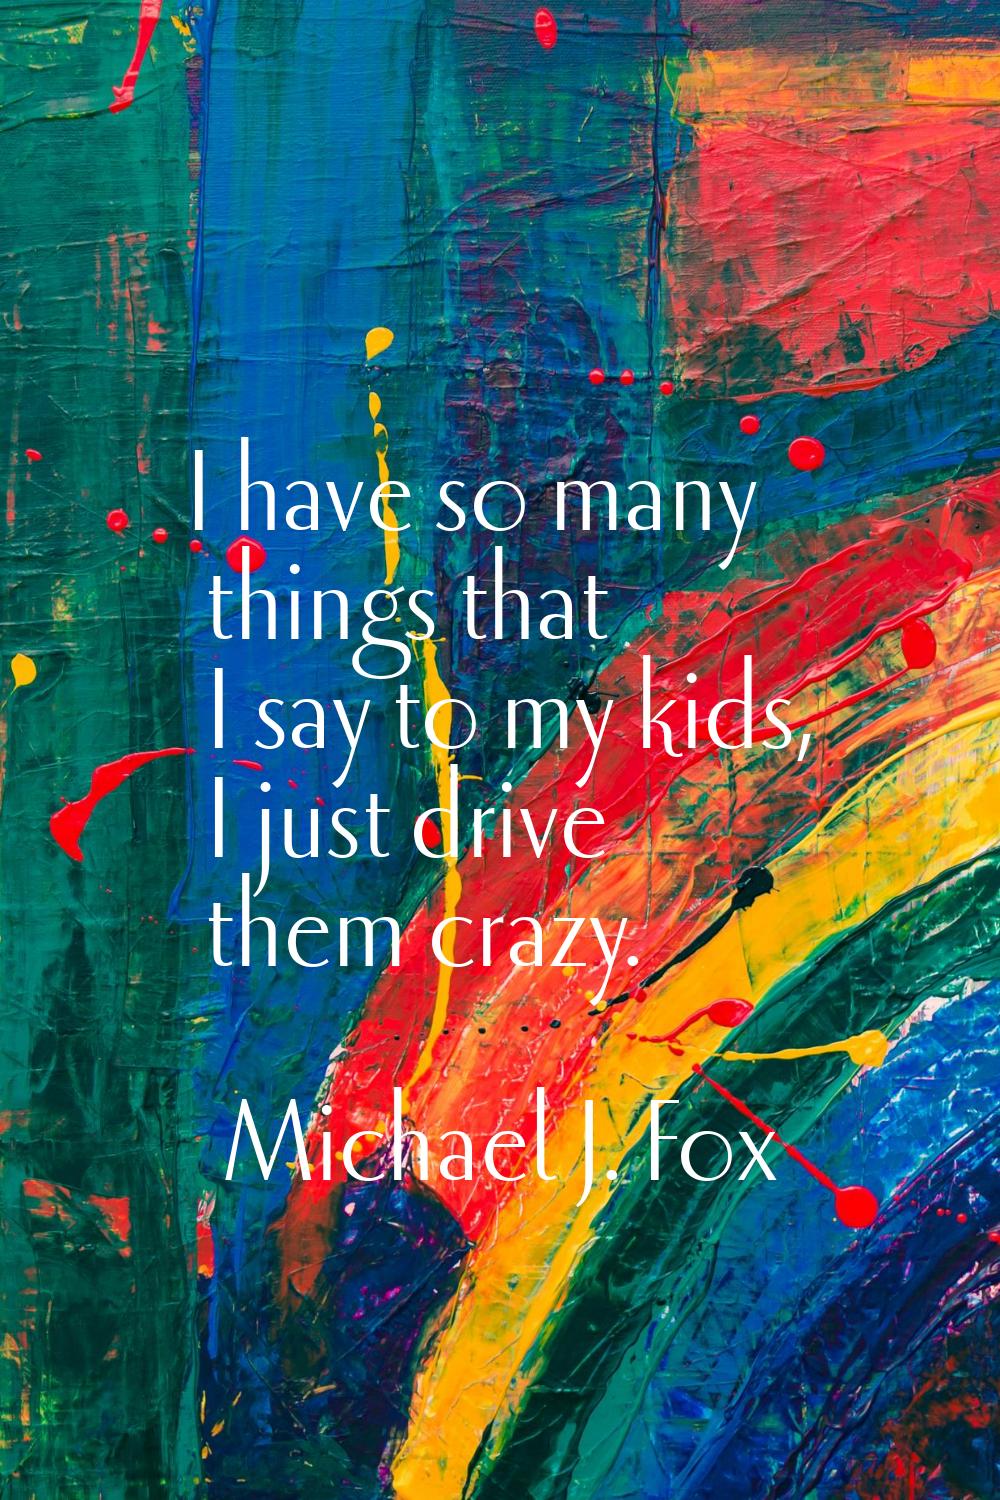 I have so many things that I say to my kids, I just drive them crazy.